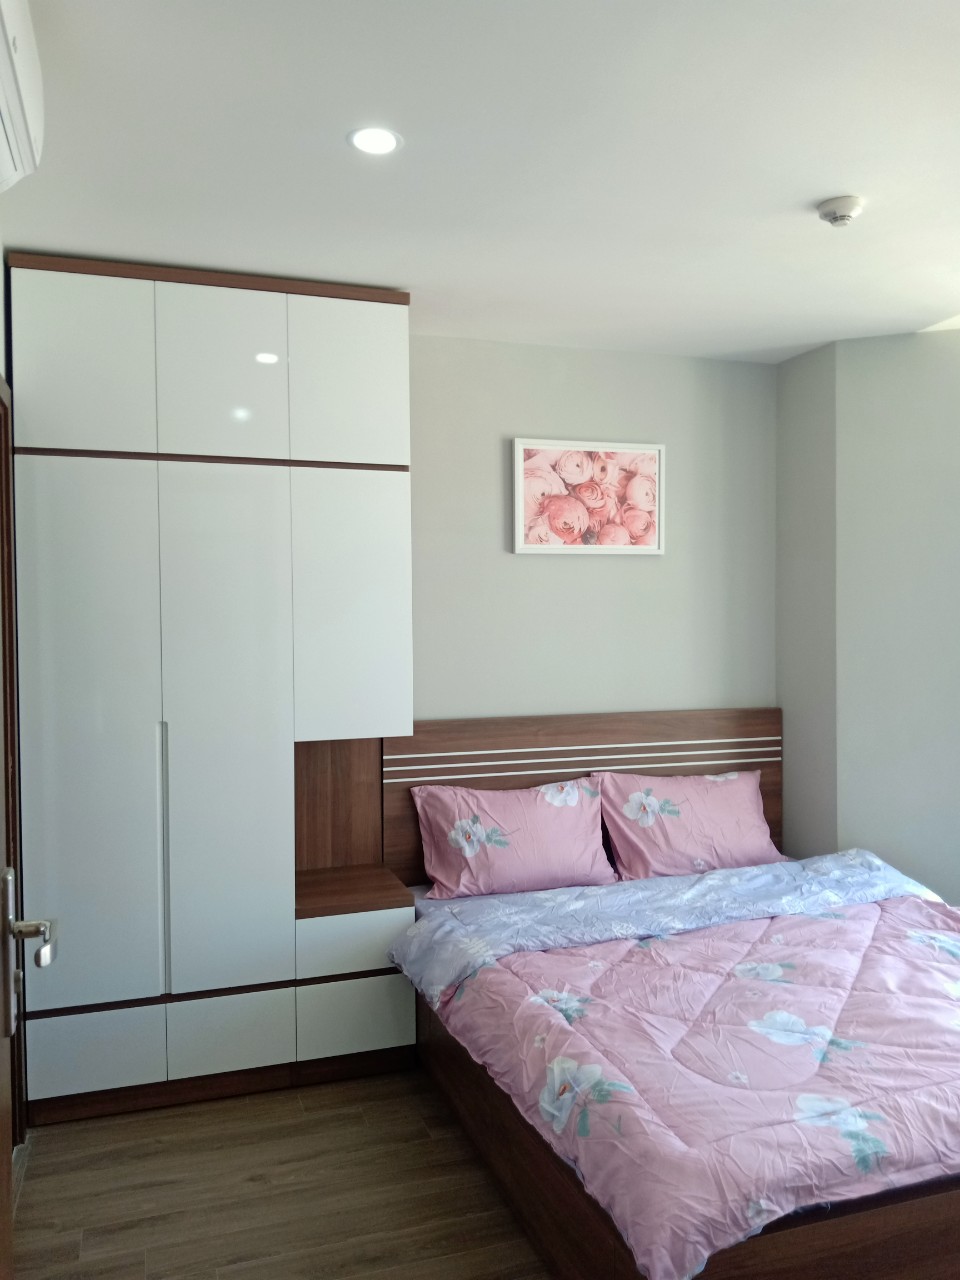 Virgo Nha Trang Apartment for rent | 2 bedrooms | 12 million